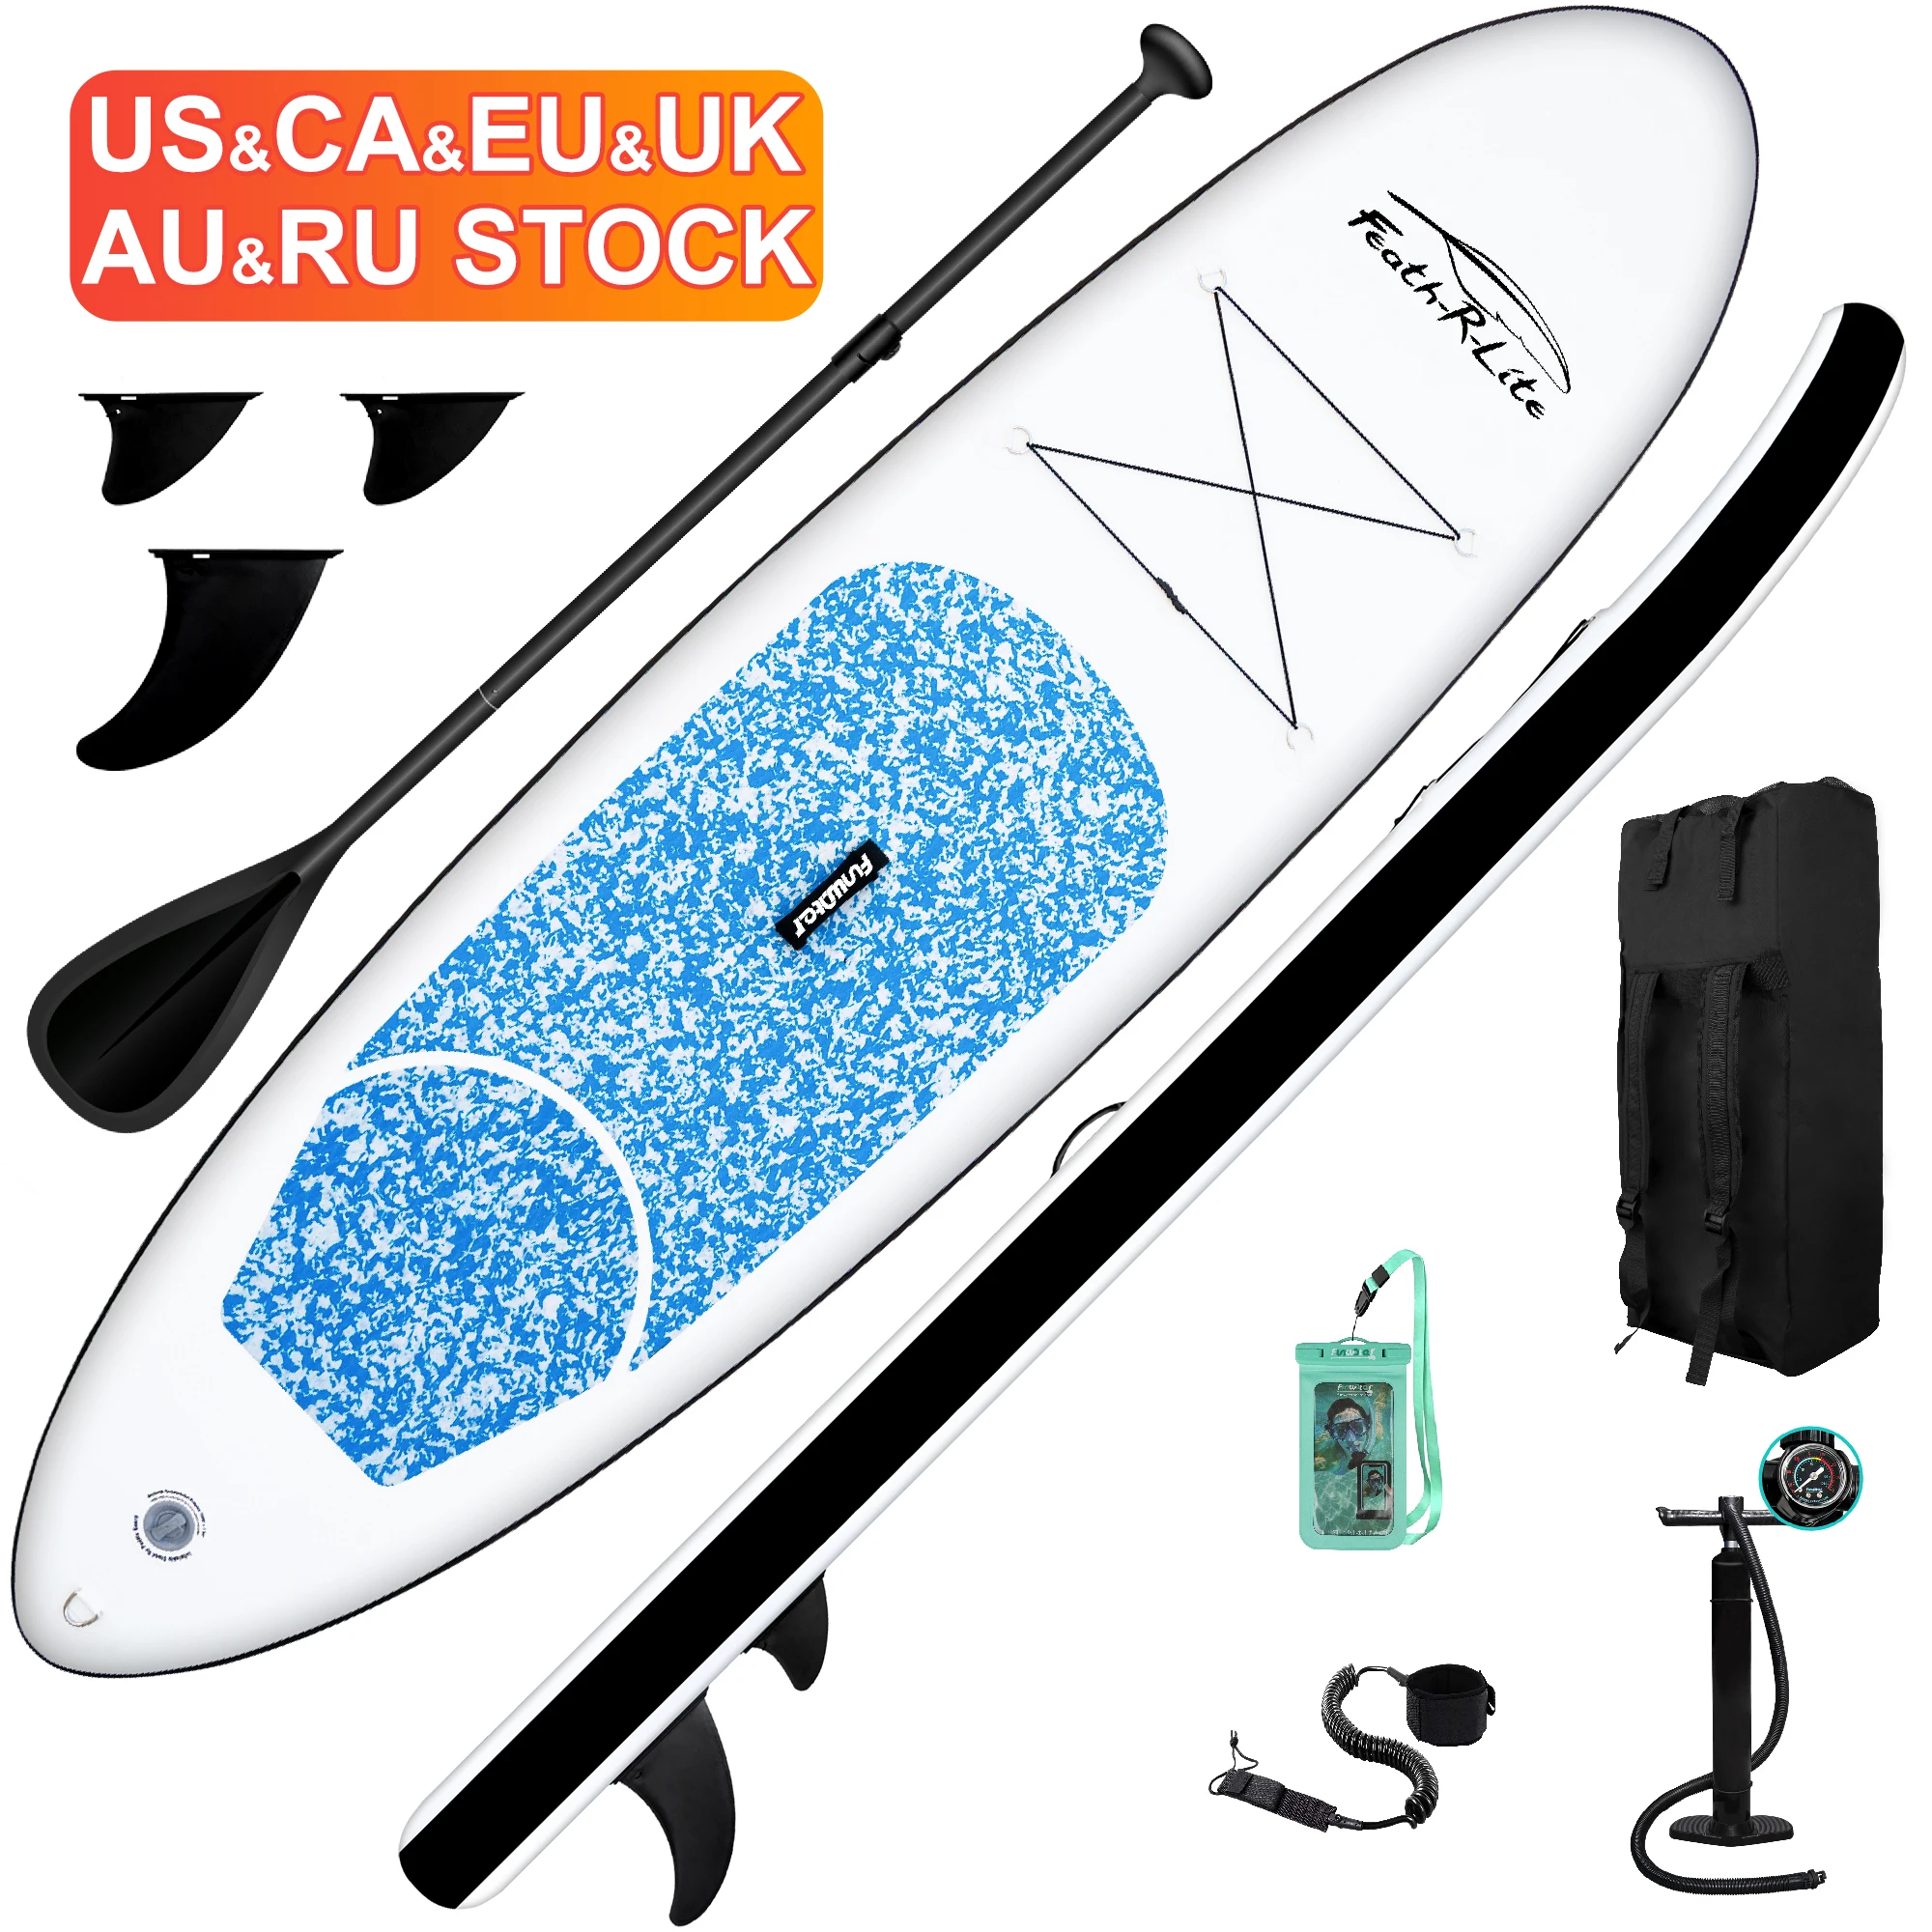 

FUNWATER Dropshipping OEM High quality 10' blue paddle board cheap price sup inflatable professional surf board surfboard